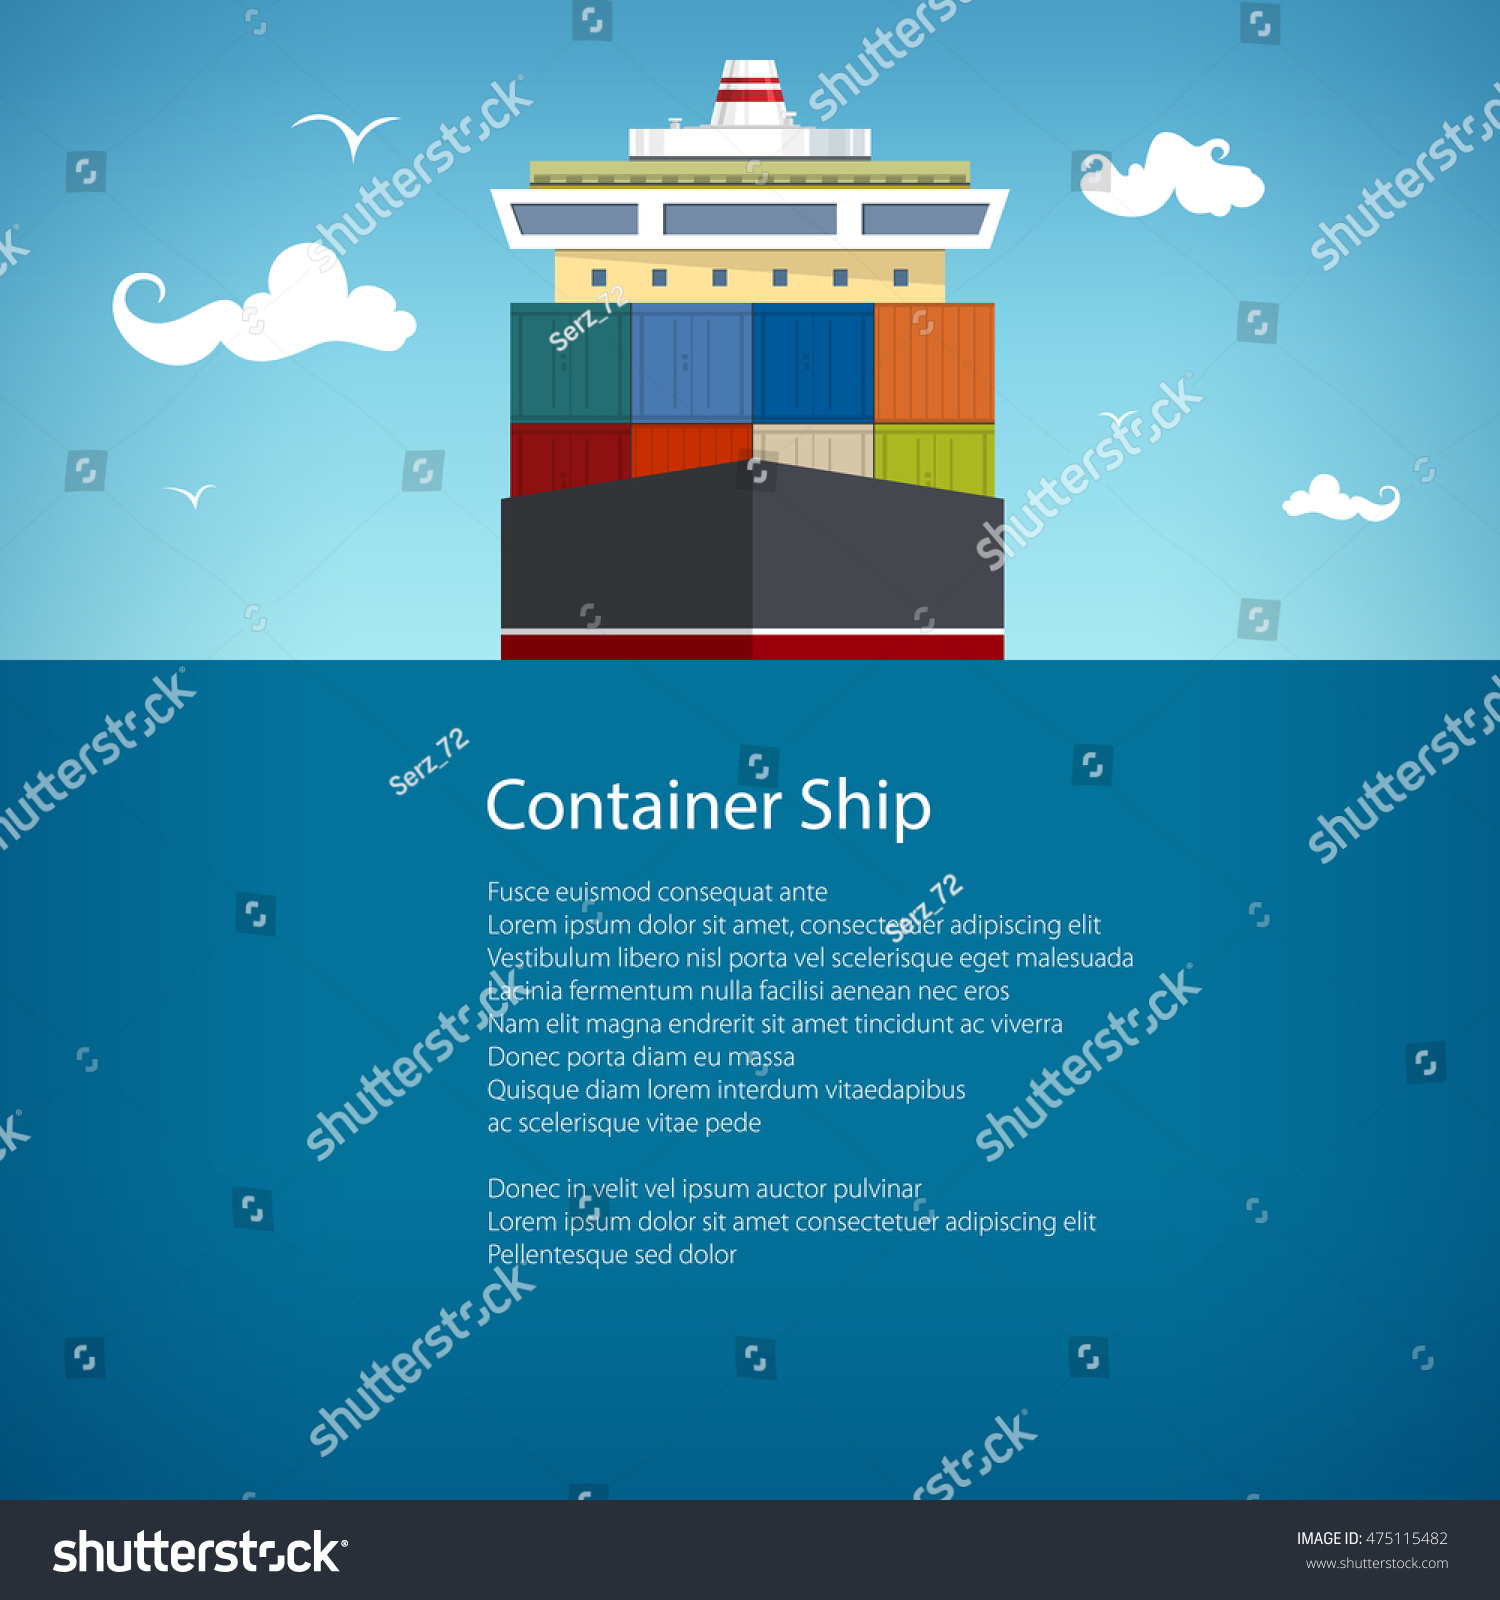 SVG of Front View of the Cargo Container Ship at Sea, Industrial Marine Vessel with Containers on Board, International Freight Transportation, Poster Brochure Flyer Design, Vector Illustration  svg